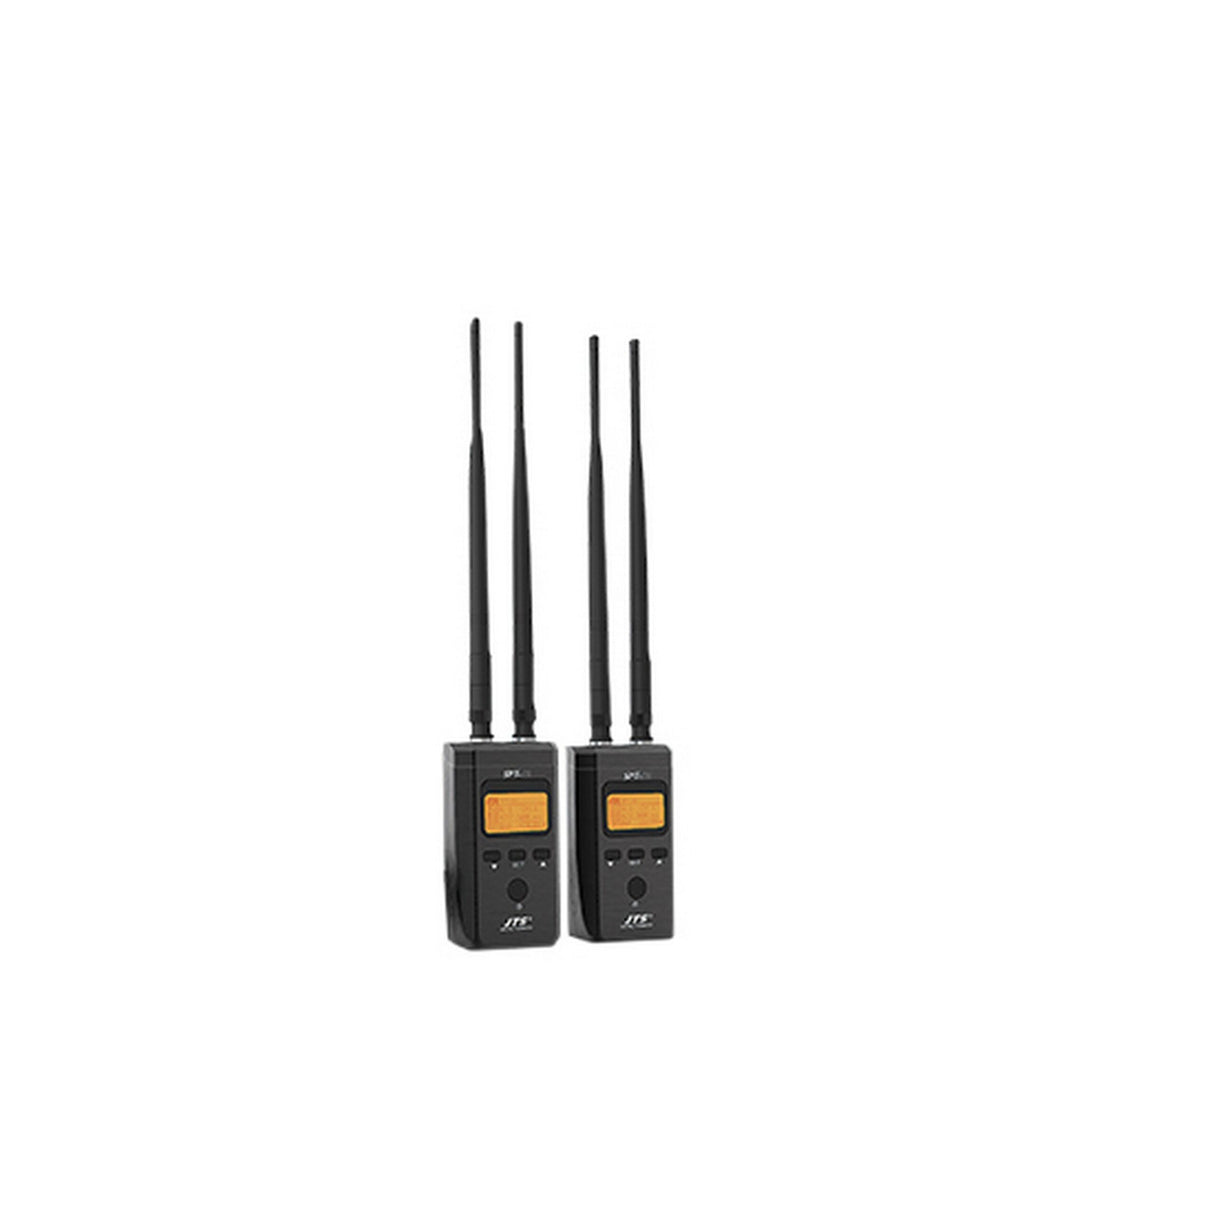 JTS SPT-1R Dual-Channel UHF Wireless Audio Receiver, 2.4GHz